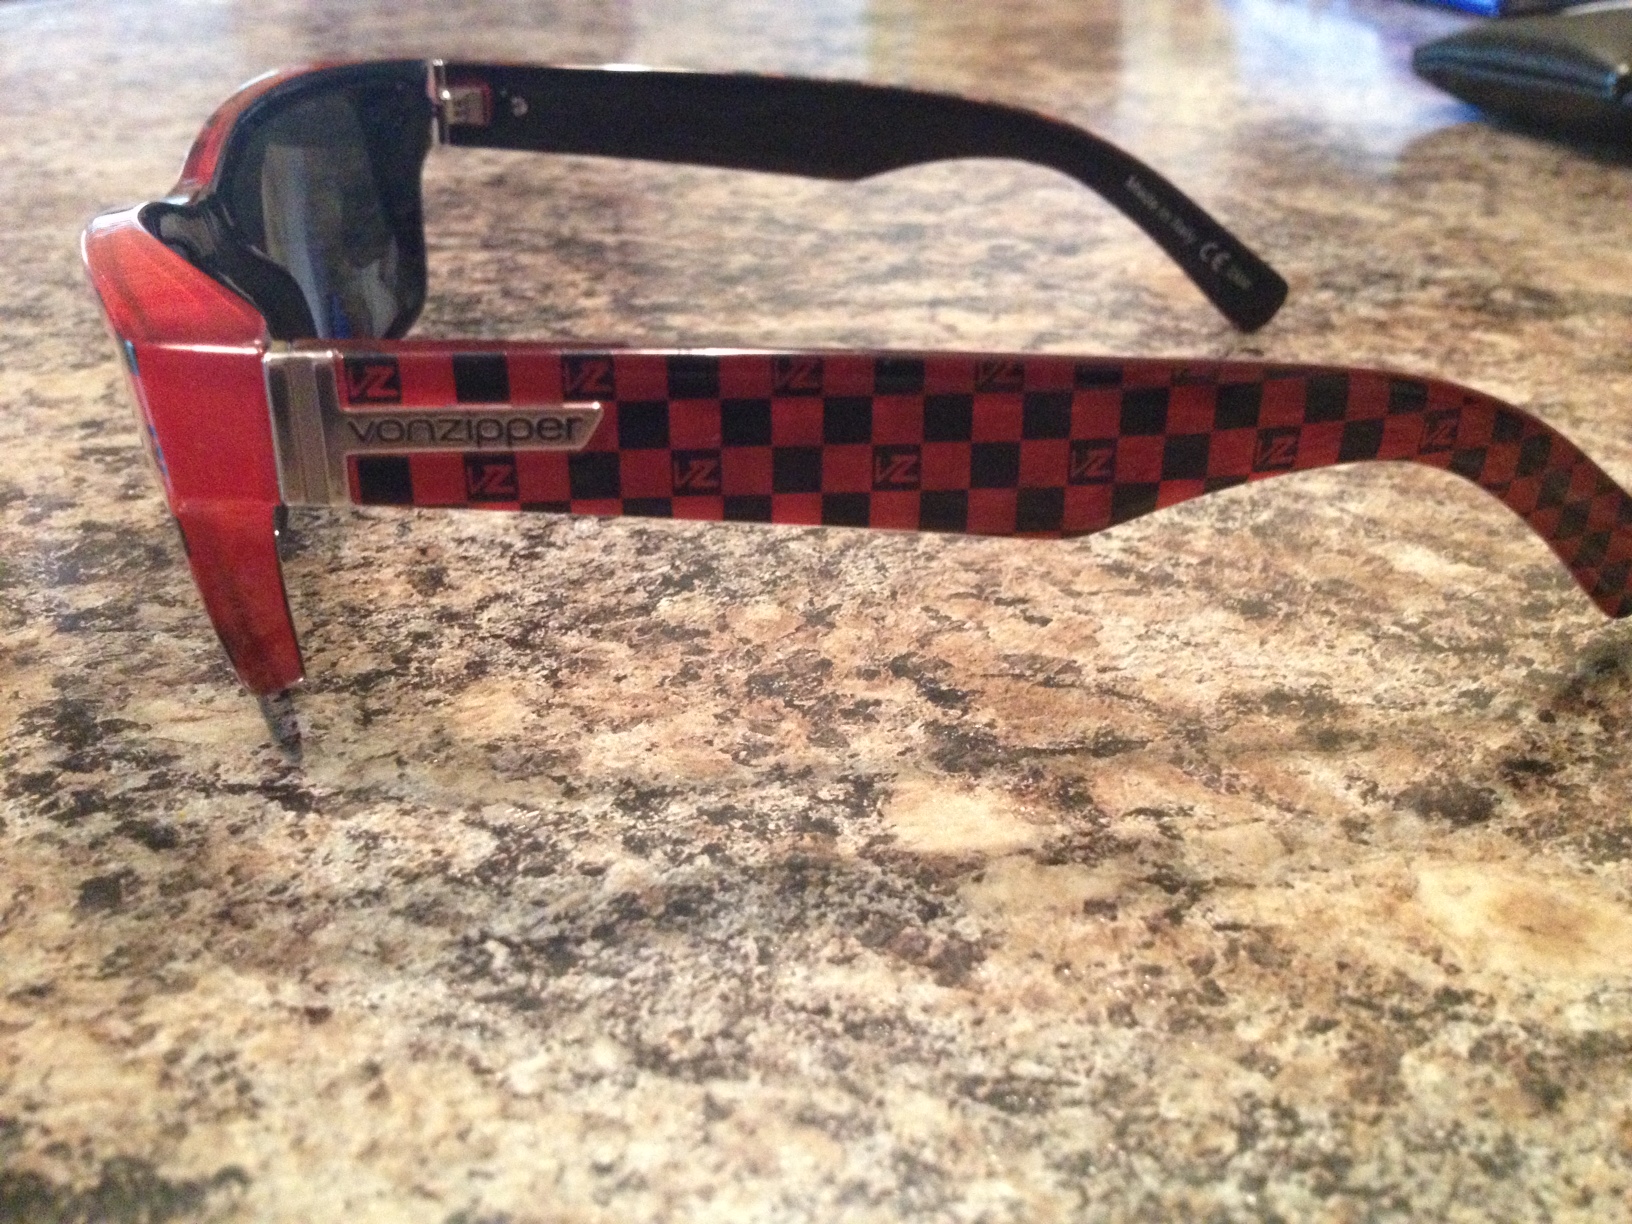 Can't find Tony Stark's sunglasses from Iron Man 3 | Page 5 | RPF Costume  and Prop Maker Community